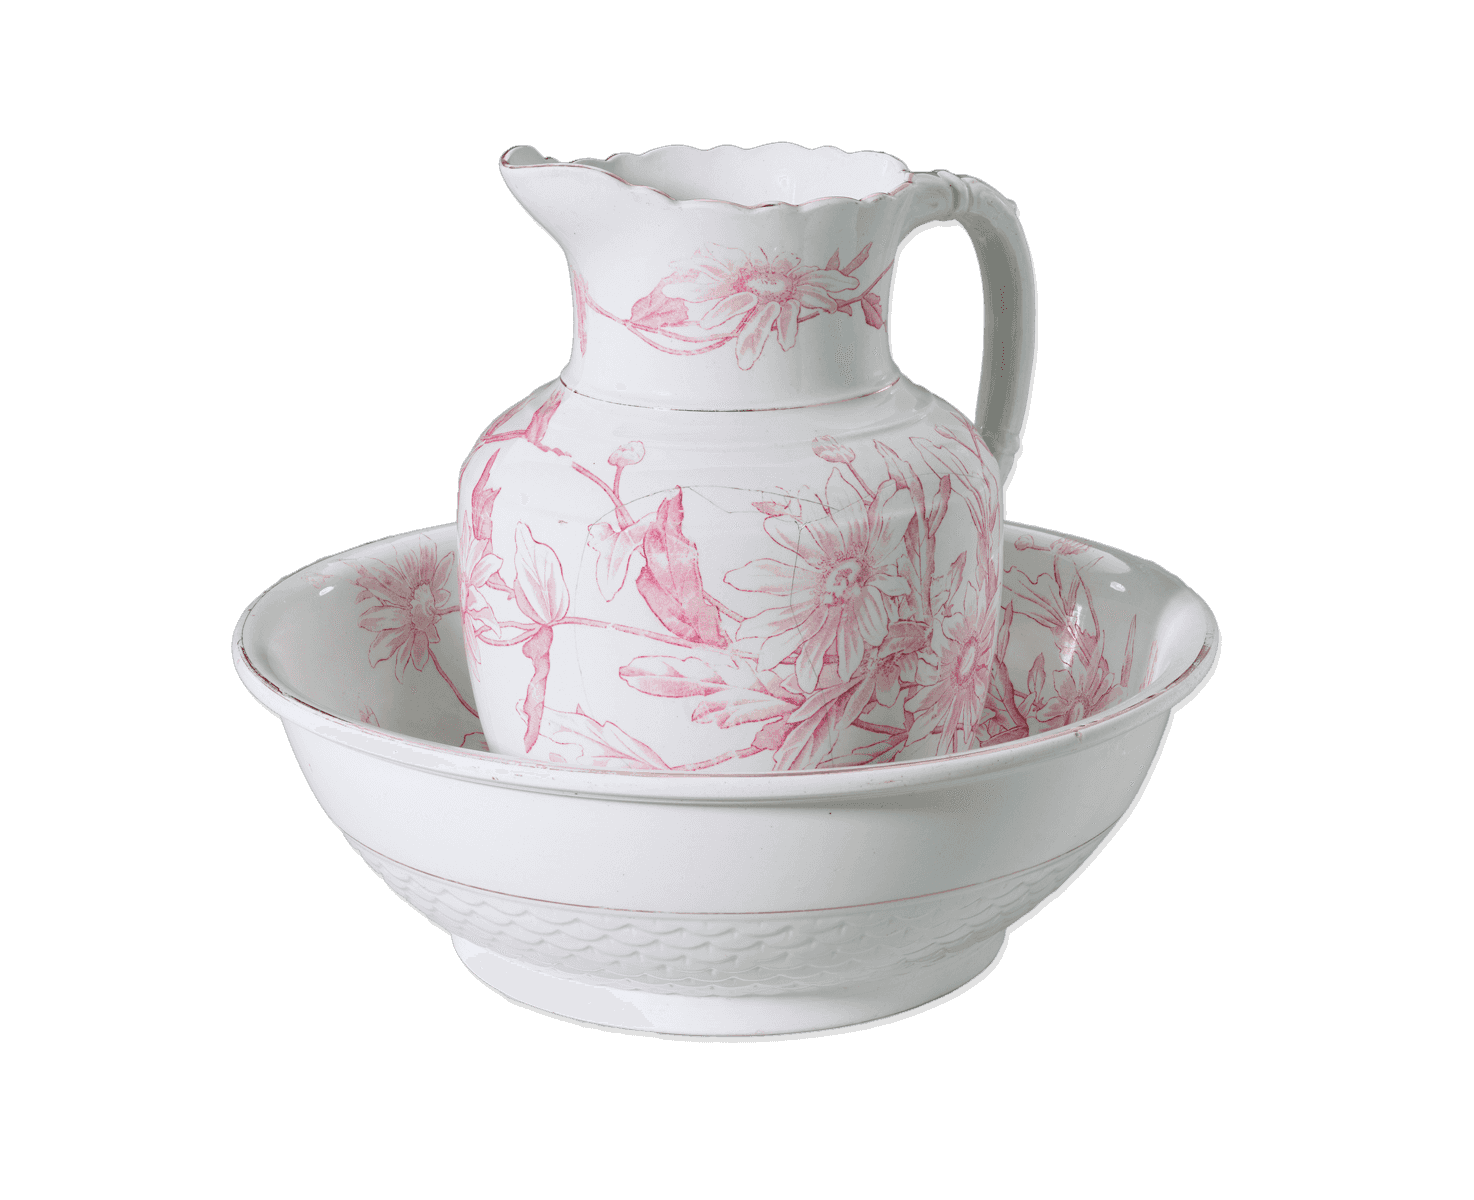 White ceramic pitcher and wash bowl set with a dcorative pink floral design.